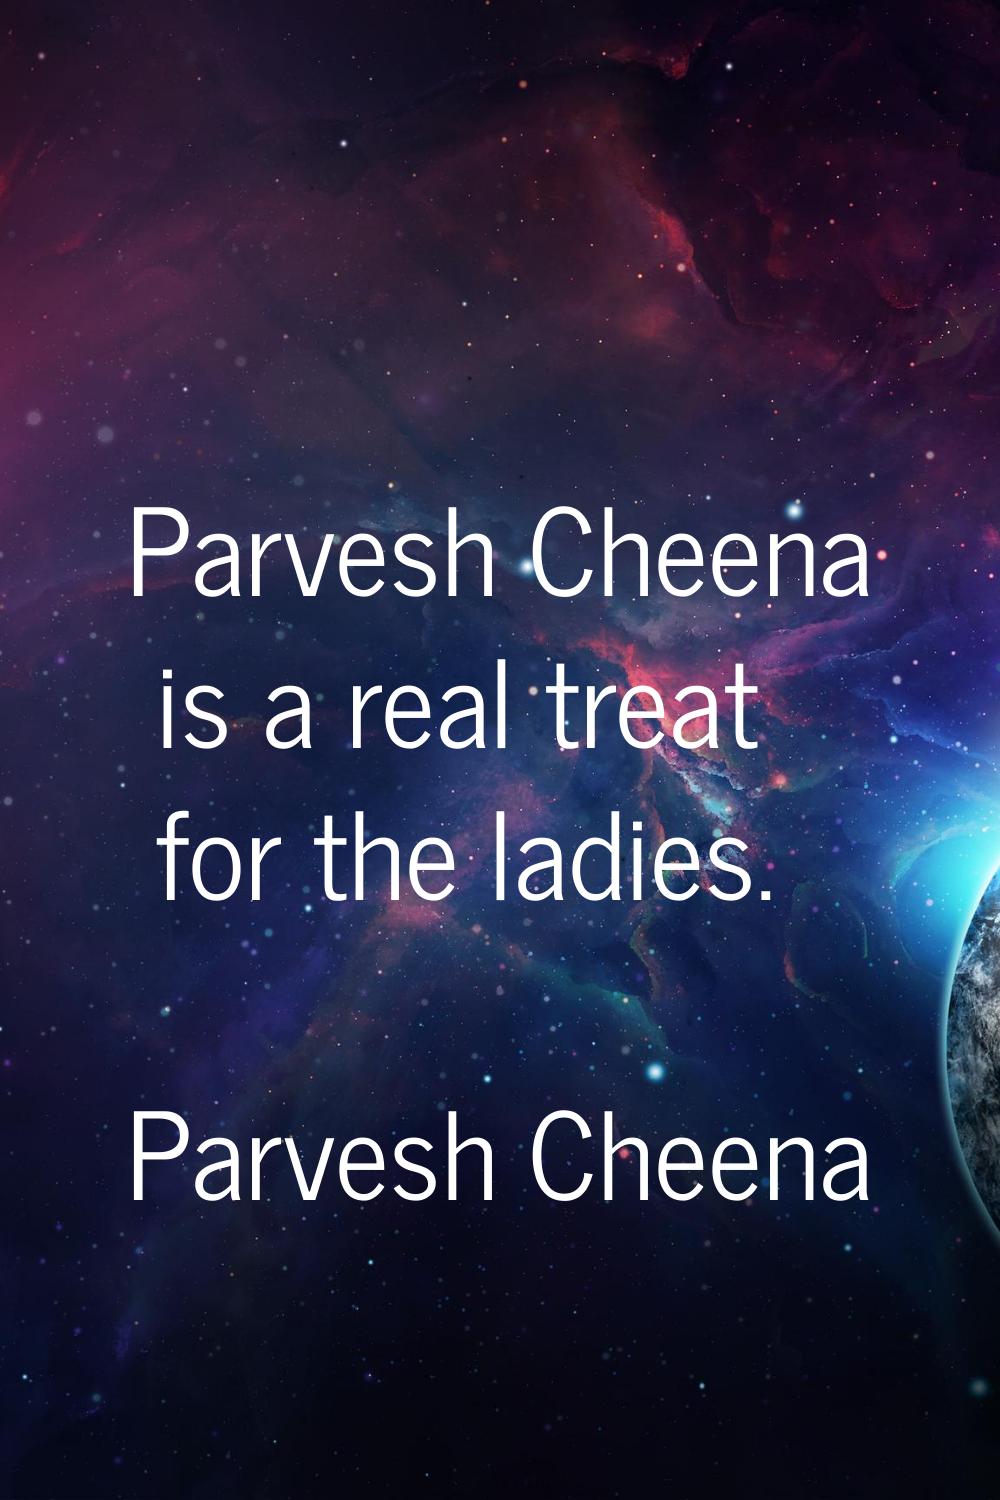 Parvesh Cheena is a real treat for the ladies.